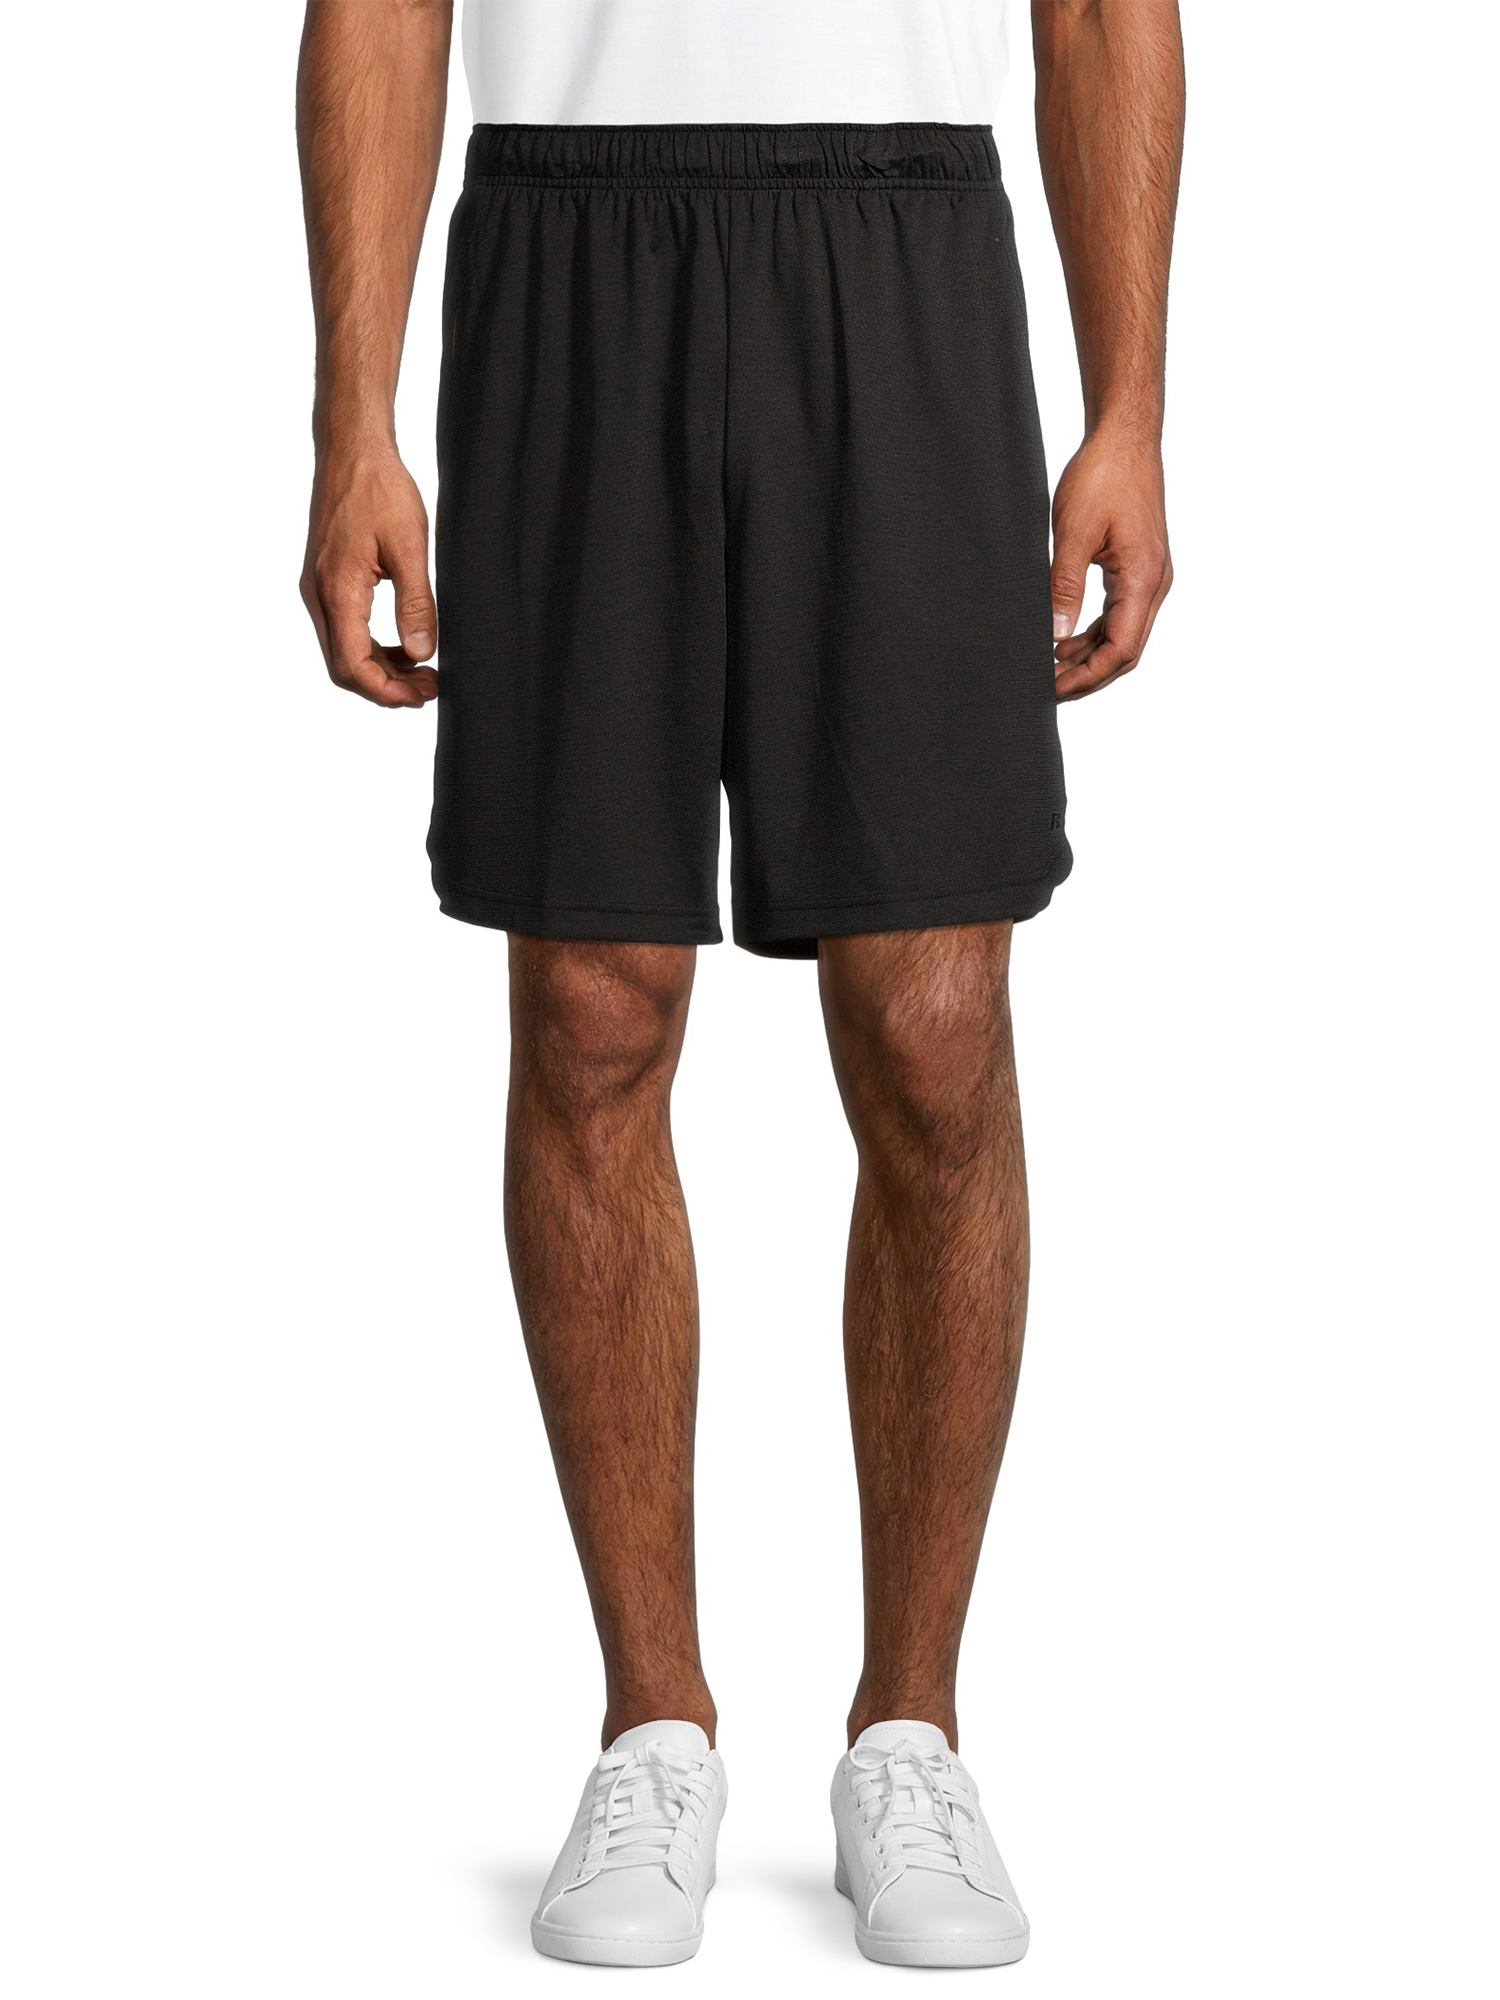 Russell Men's 9" Core Performance Active Shorts, up to Size 5XL - image 1 of 6